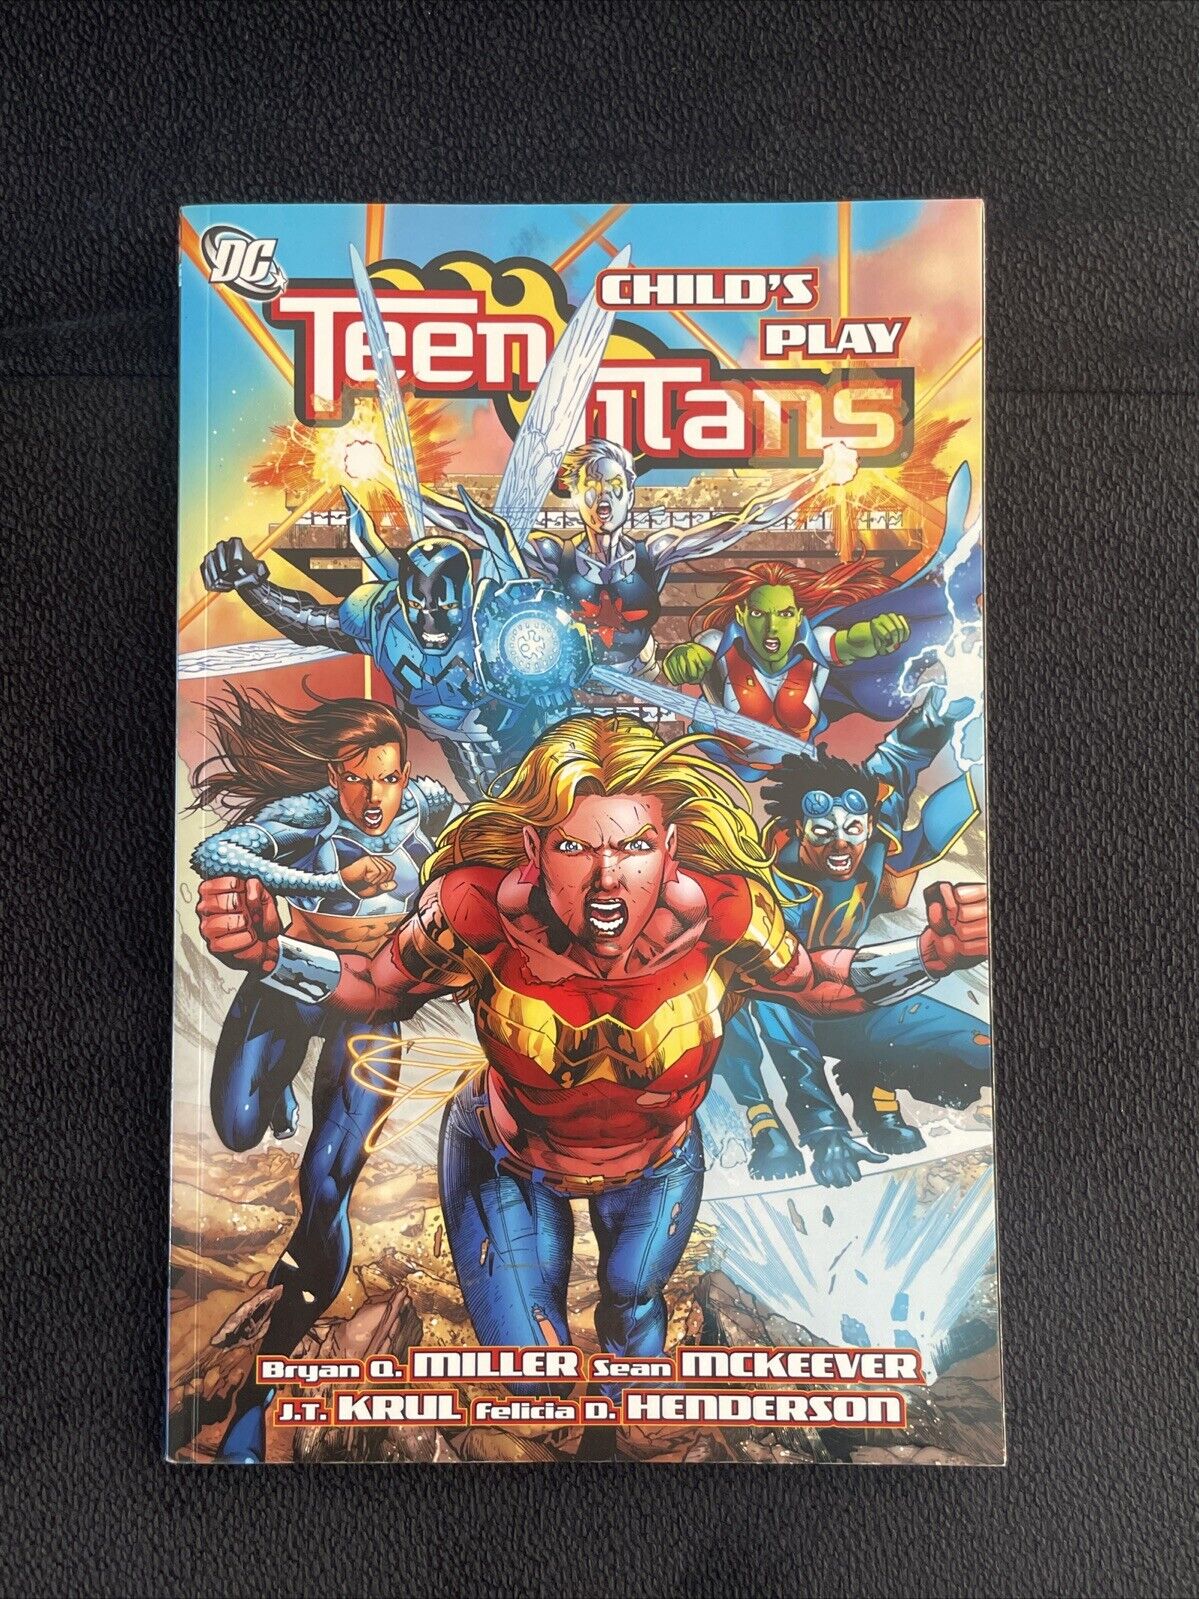 DC - TEEN TITANS - CHILD\'S PLAY - Trade Paperback